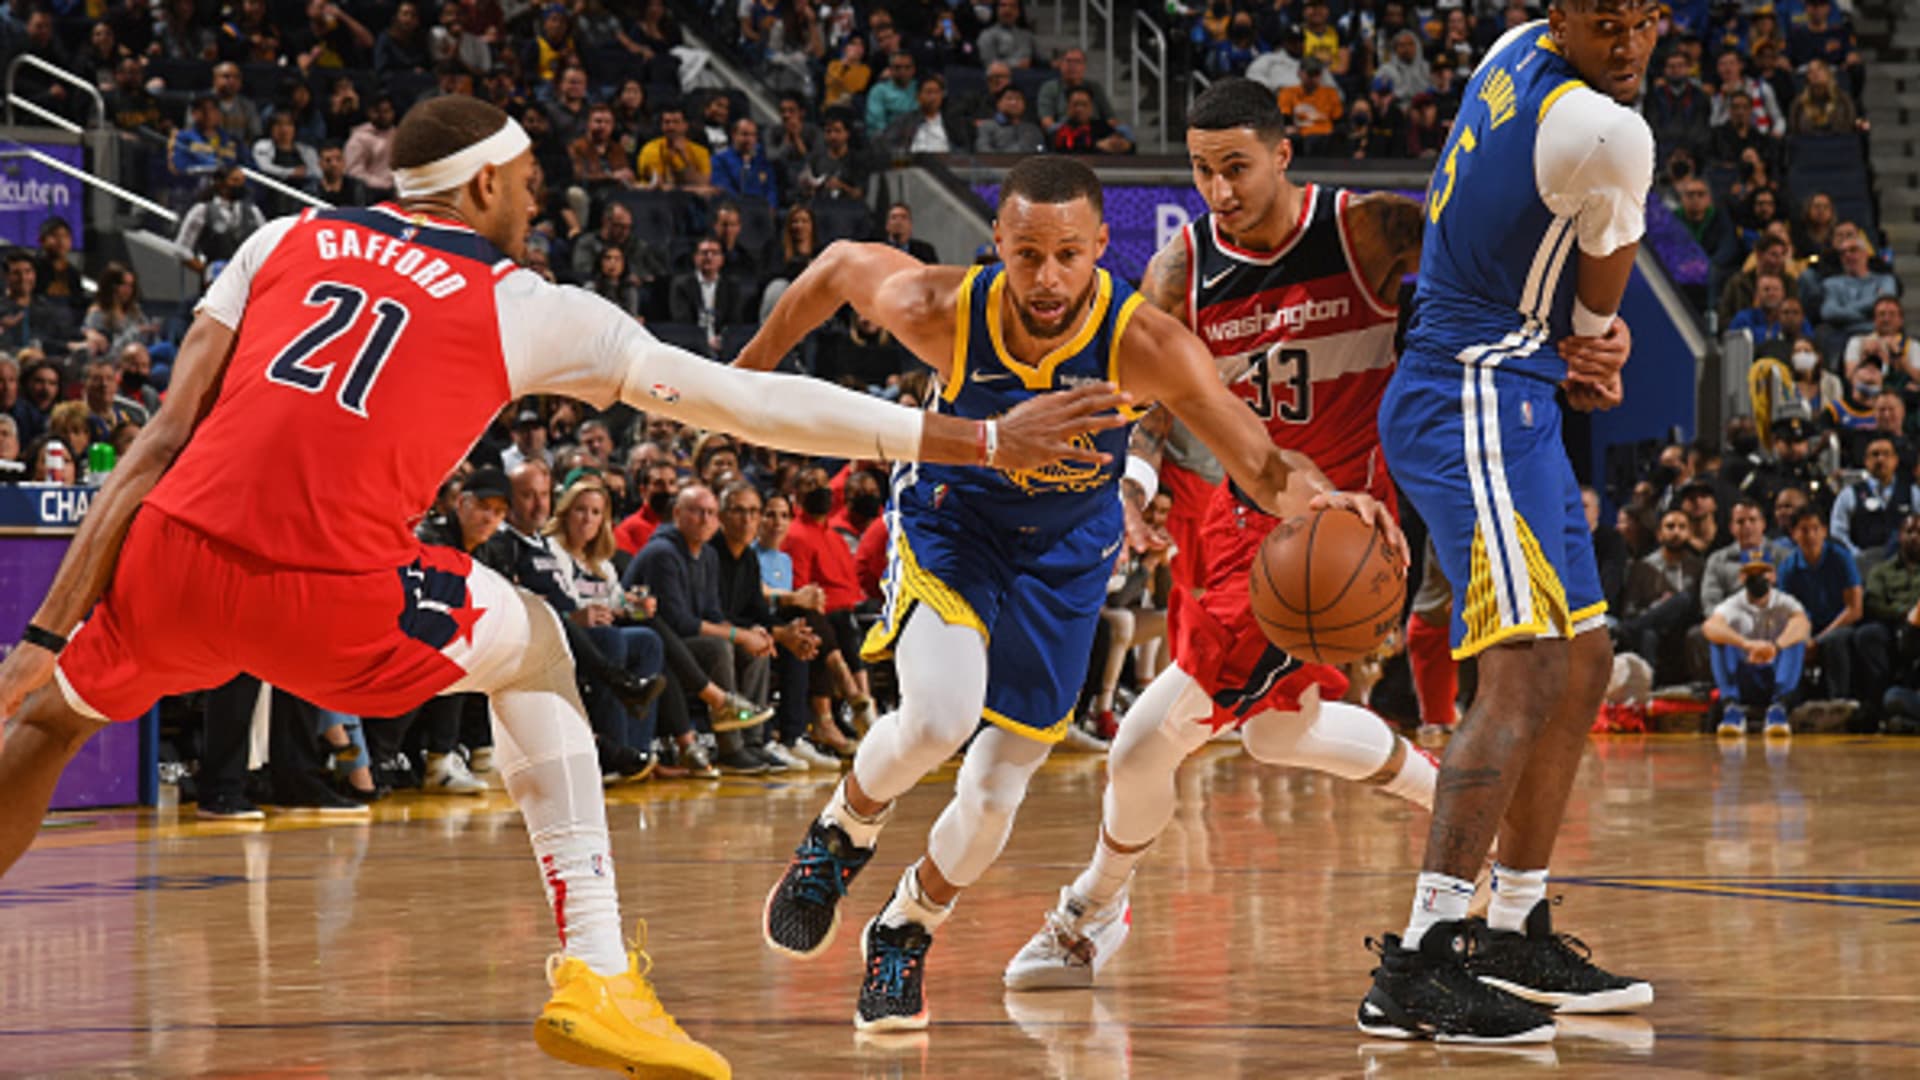 Stephen Curry #30 of the Golden State Warriors drives to the basket during the game against the Washington Wizards on March 14, 2022 at Chase Center in San Francisco, California.